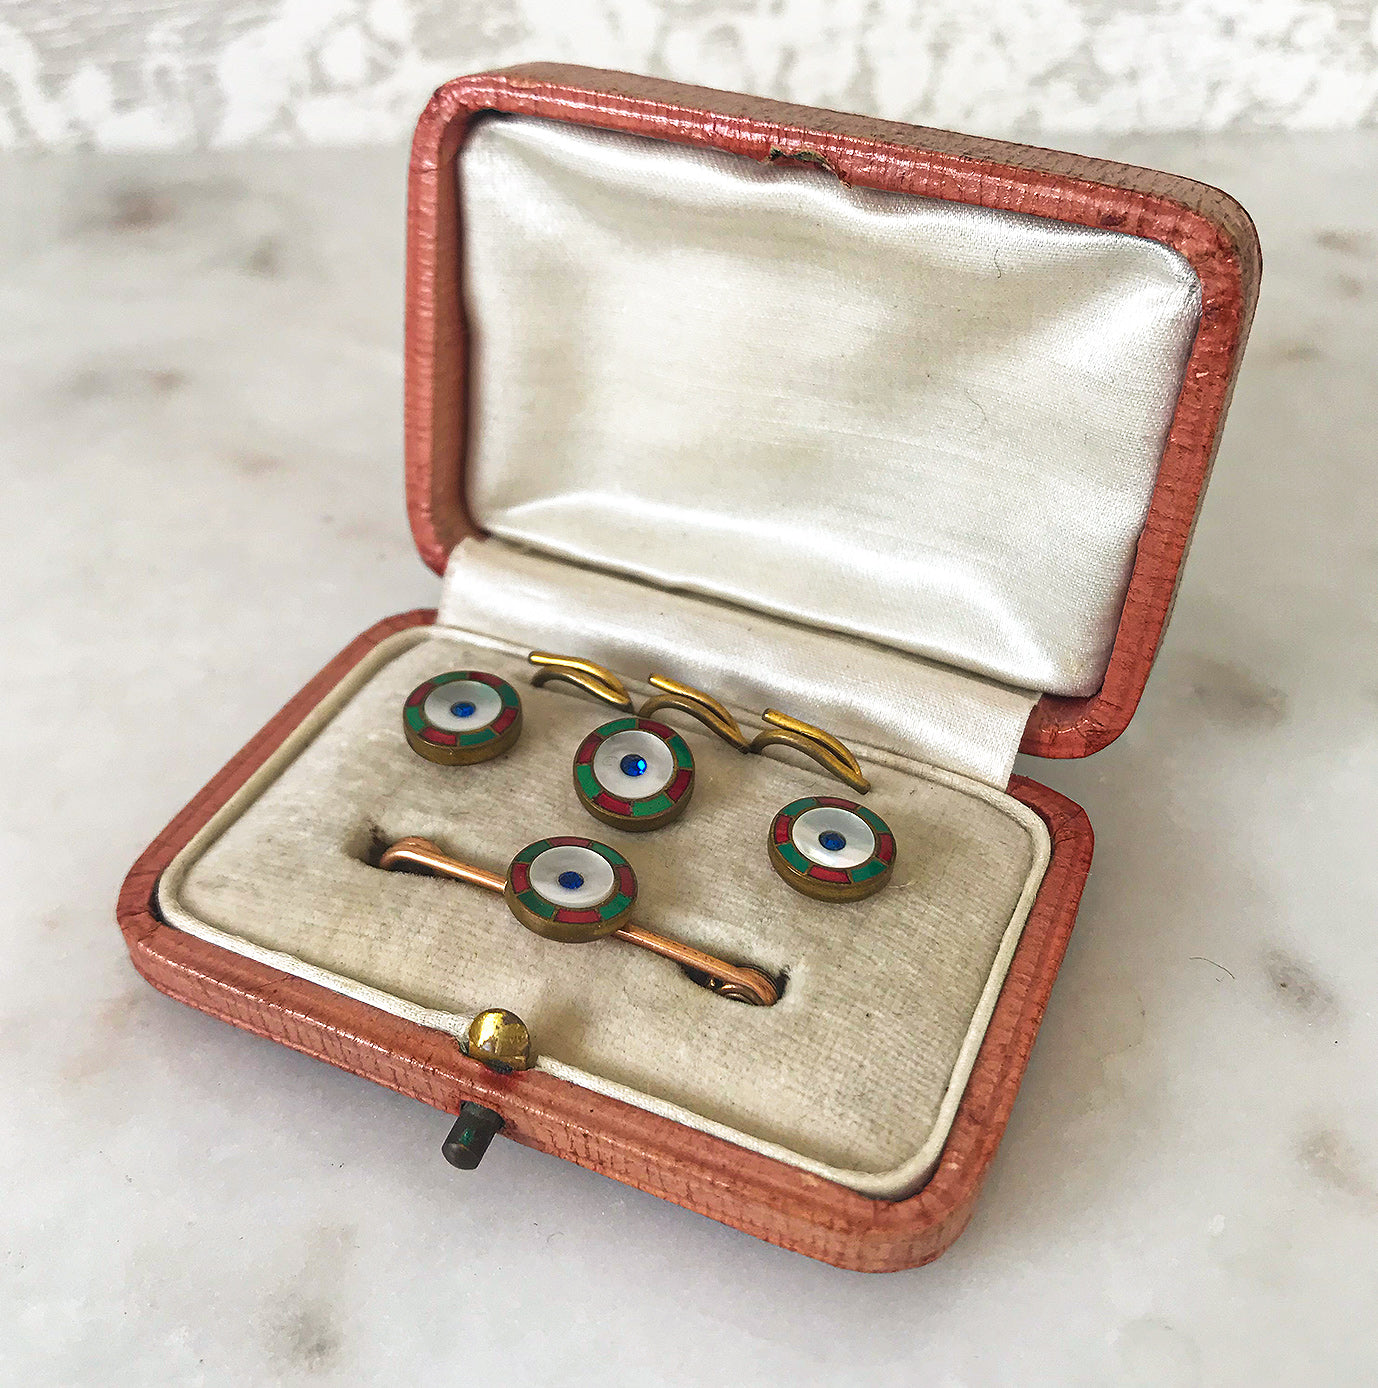 A smart matching set of 3 vintage gents dress buttons along with matching stock pin and 3 fastening loops, all in their original red presentation box - SHOP NOW - www.intovintage.co.uk